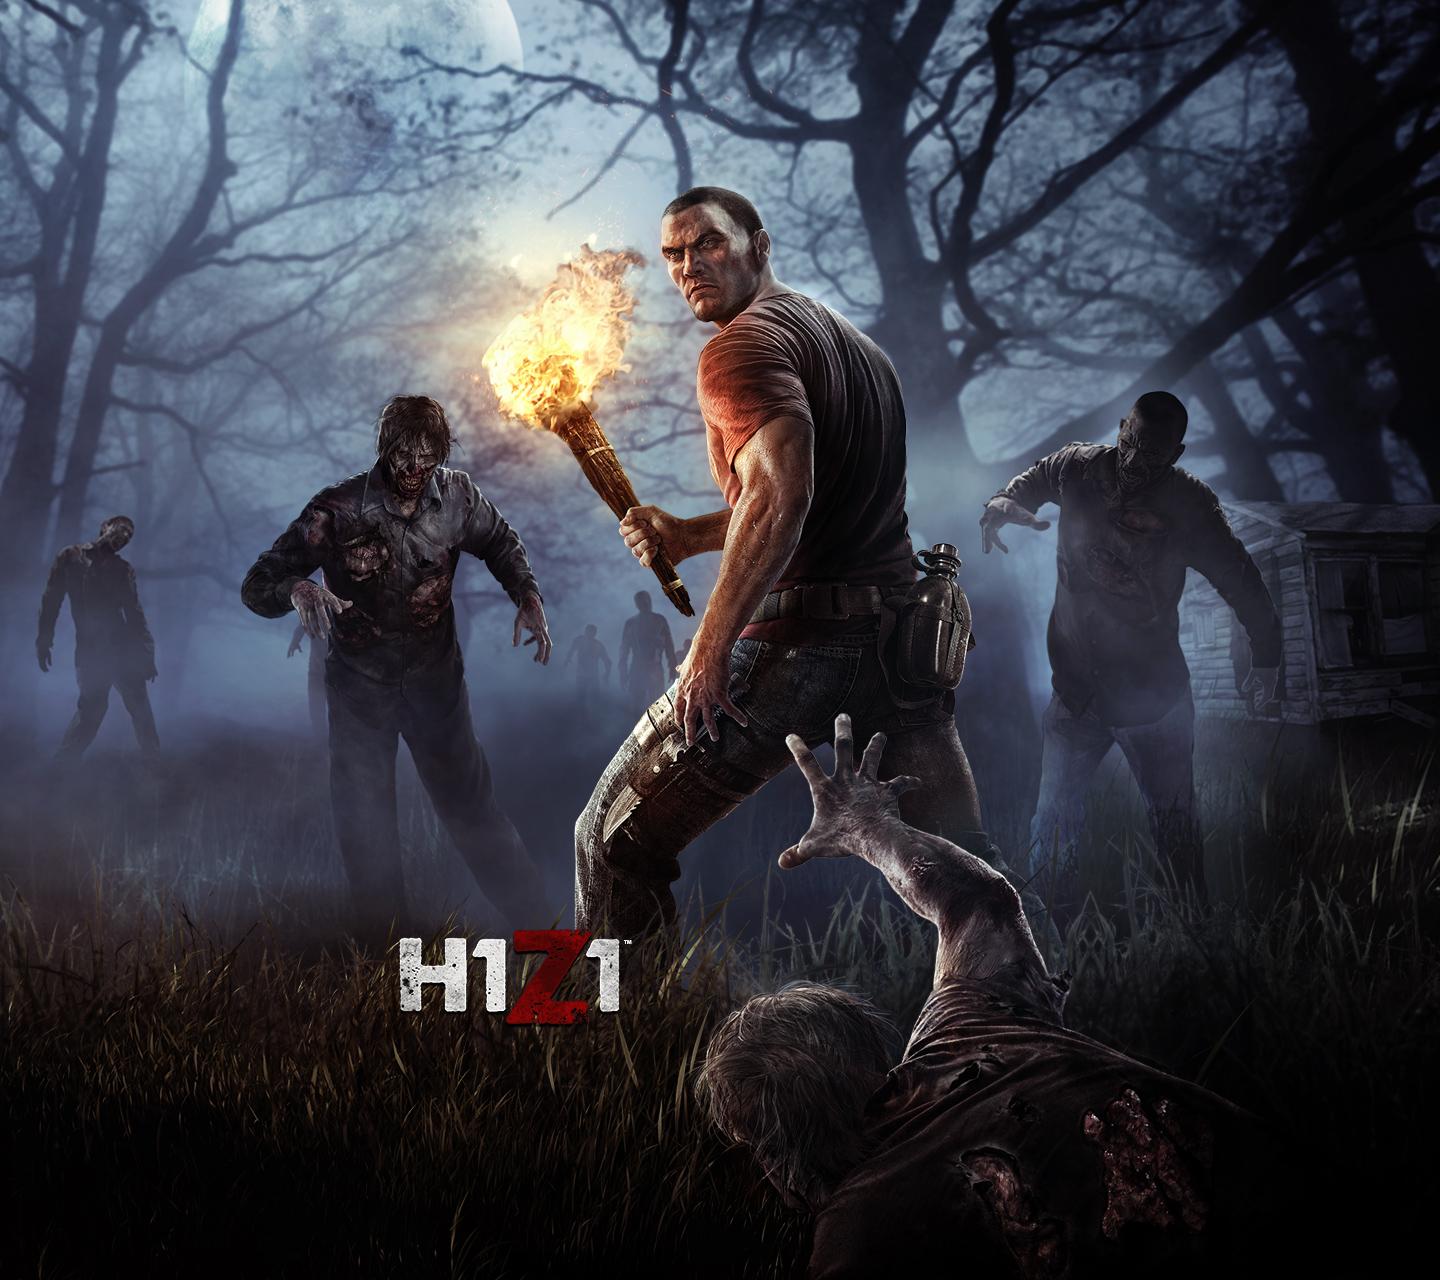 Index Of BDH Index_fichiers H1Z1 Wallpaper